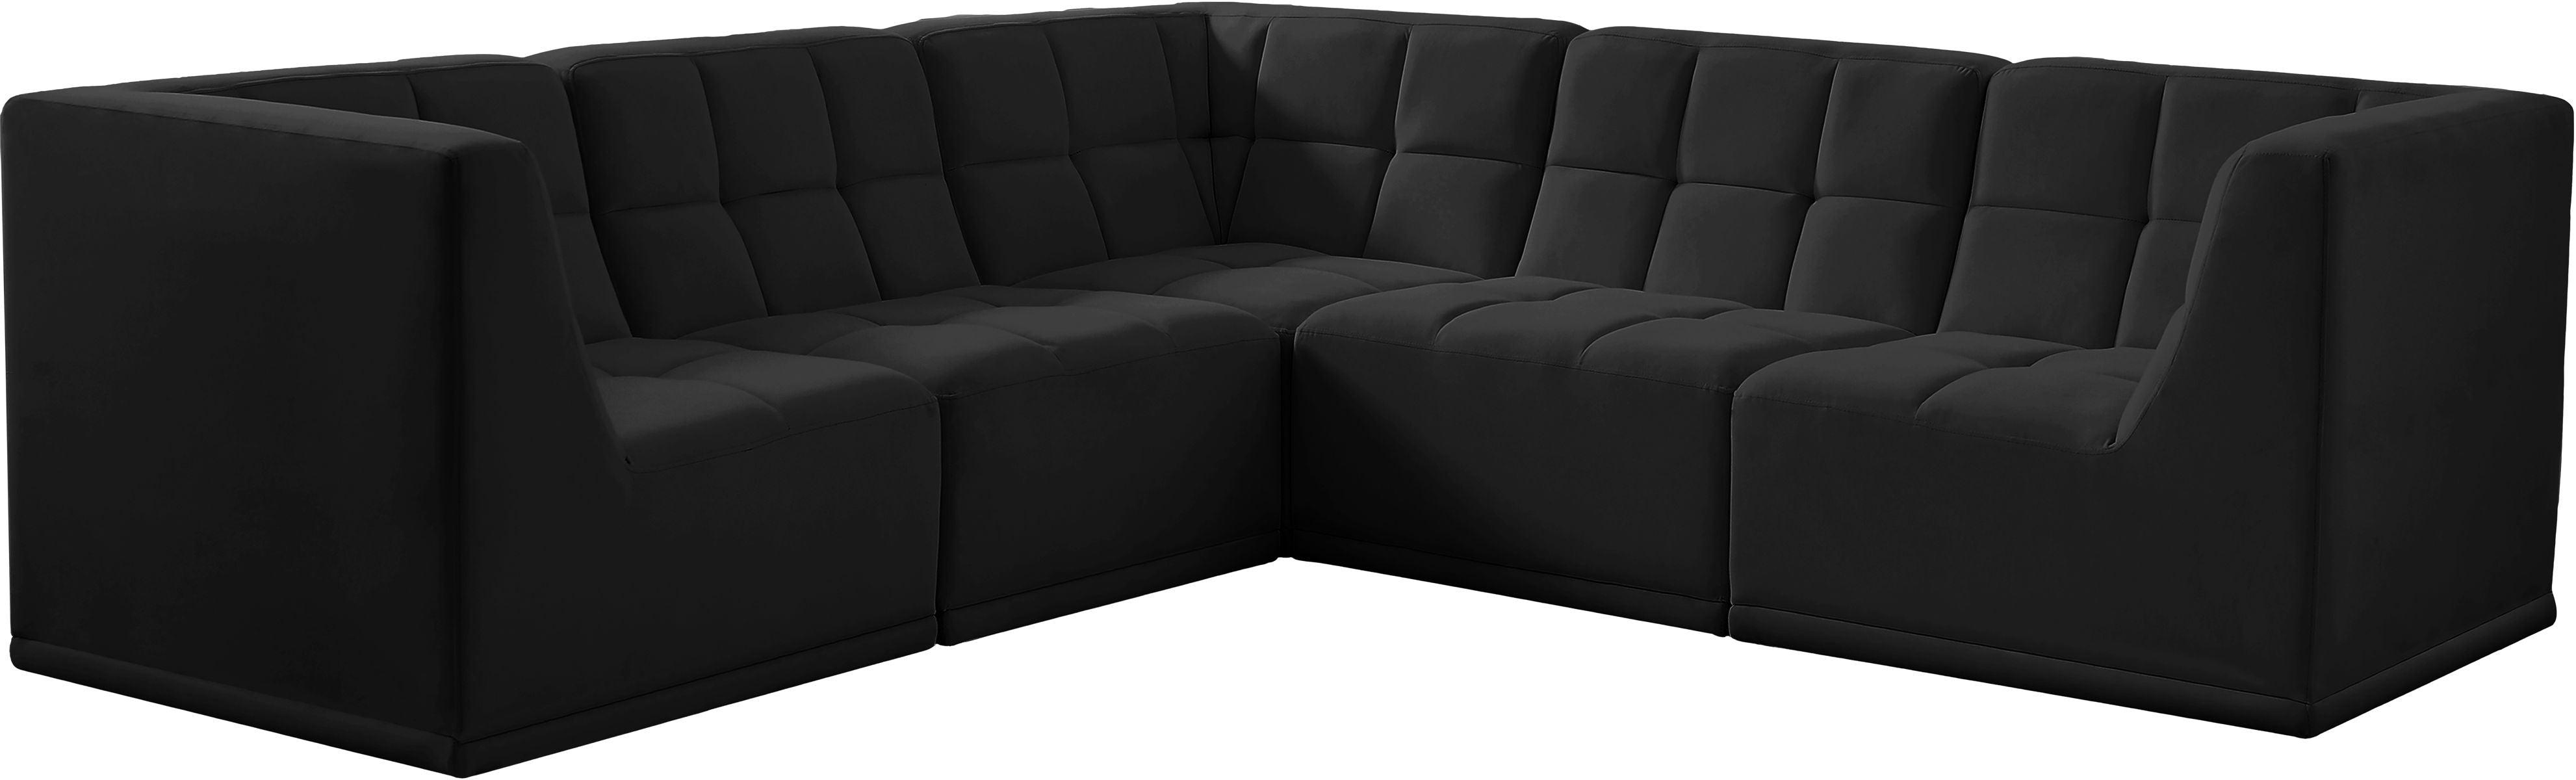 Meridian Furniture - Relax - Modular Sectional 5 Piece - Black - Modern & Contemporary - 5th Avenue Furniture